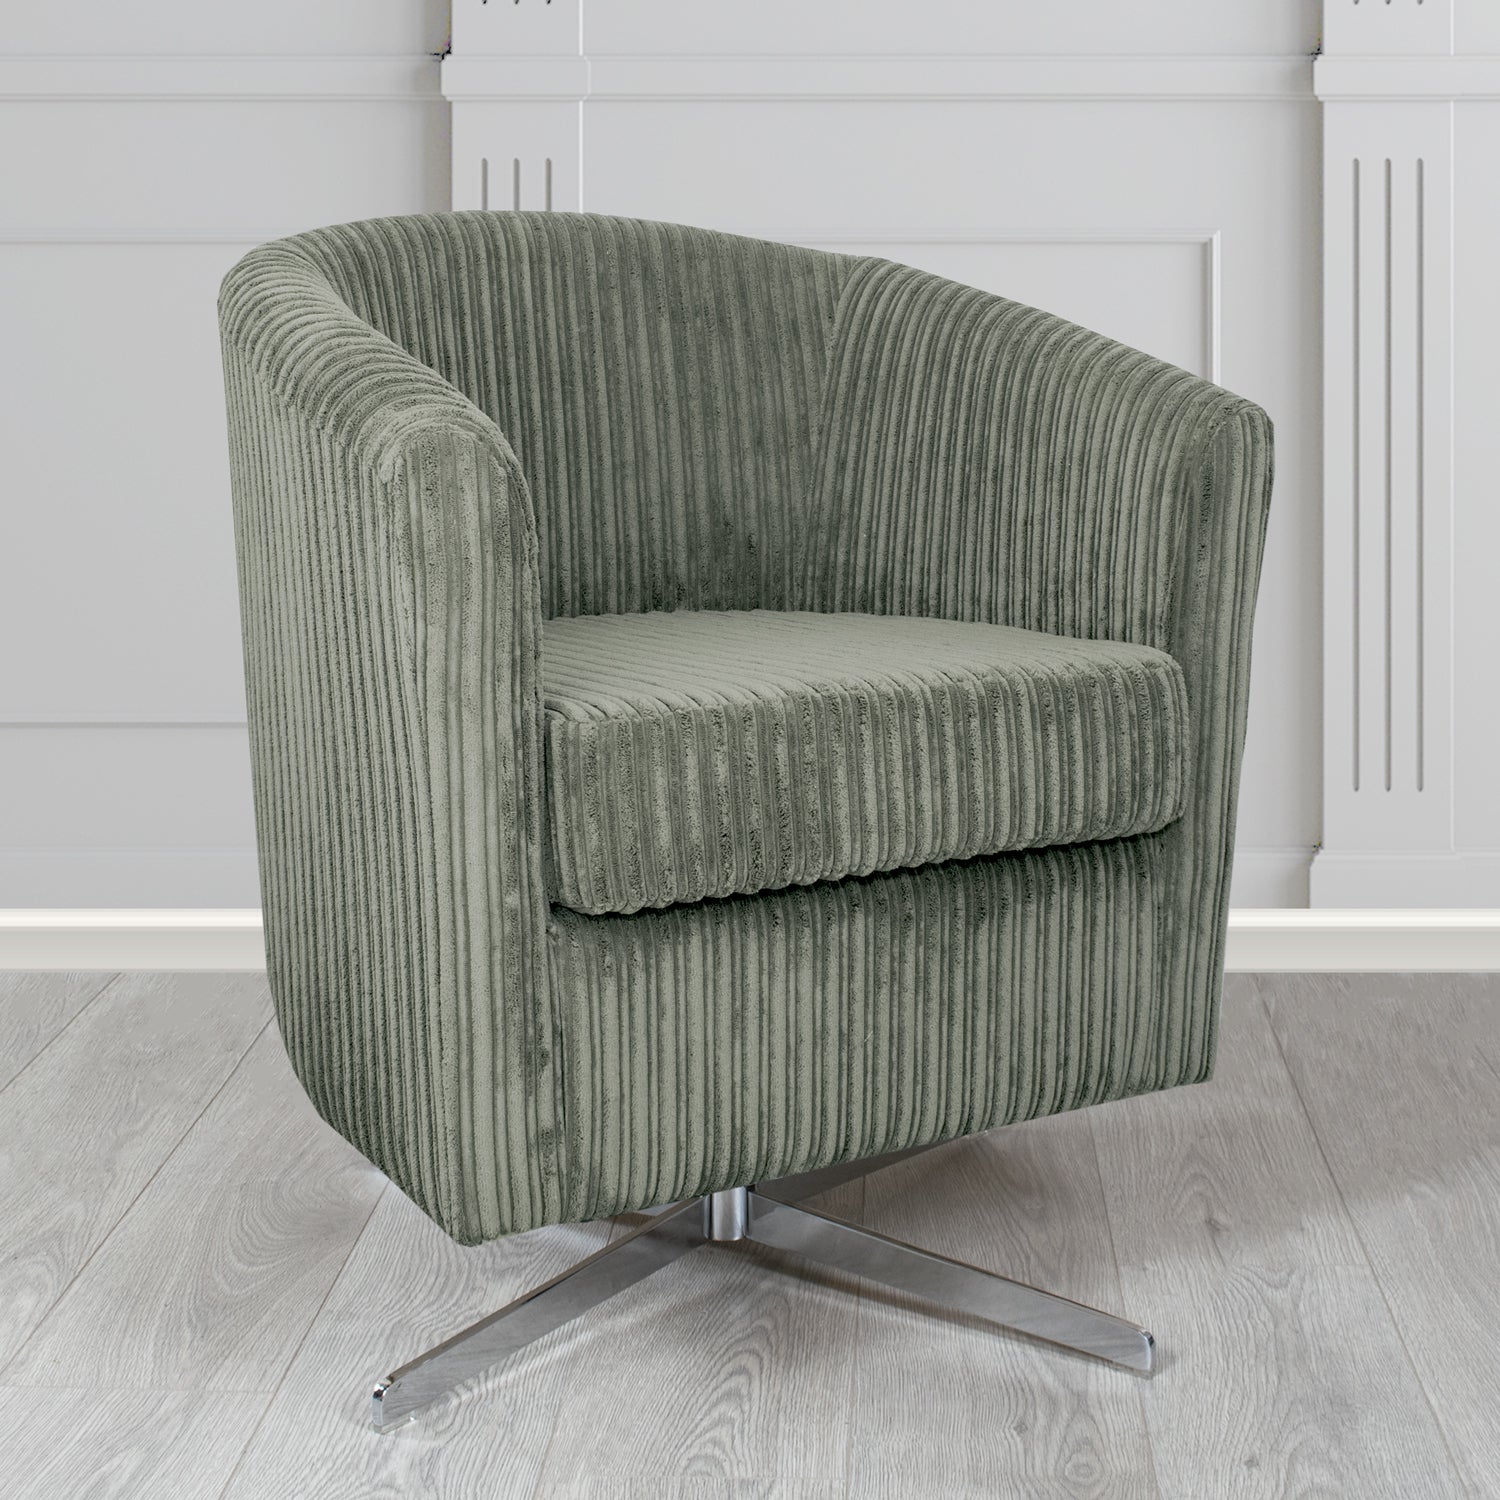 Cannes Swivel Tub Chair in Conway Charcoal Plain Texture Fabric - The Tub Chair Shop